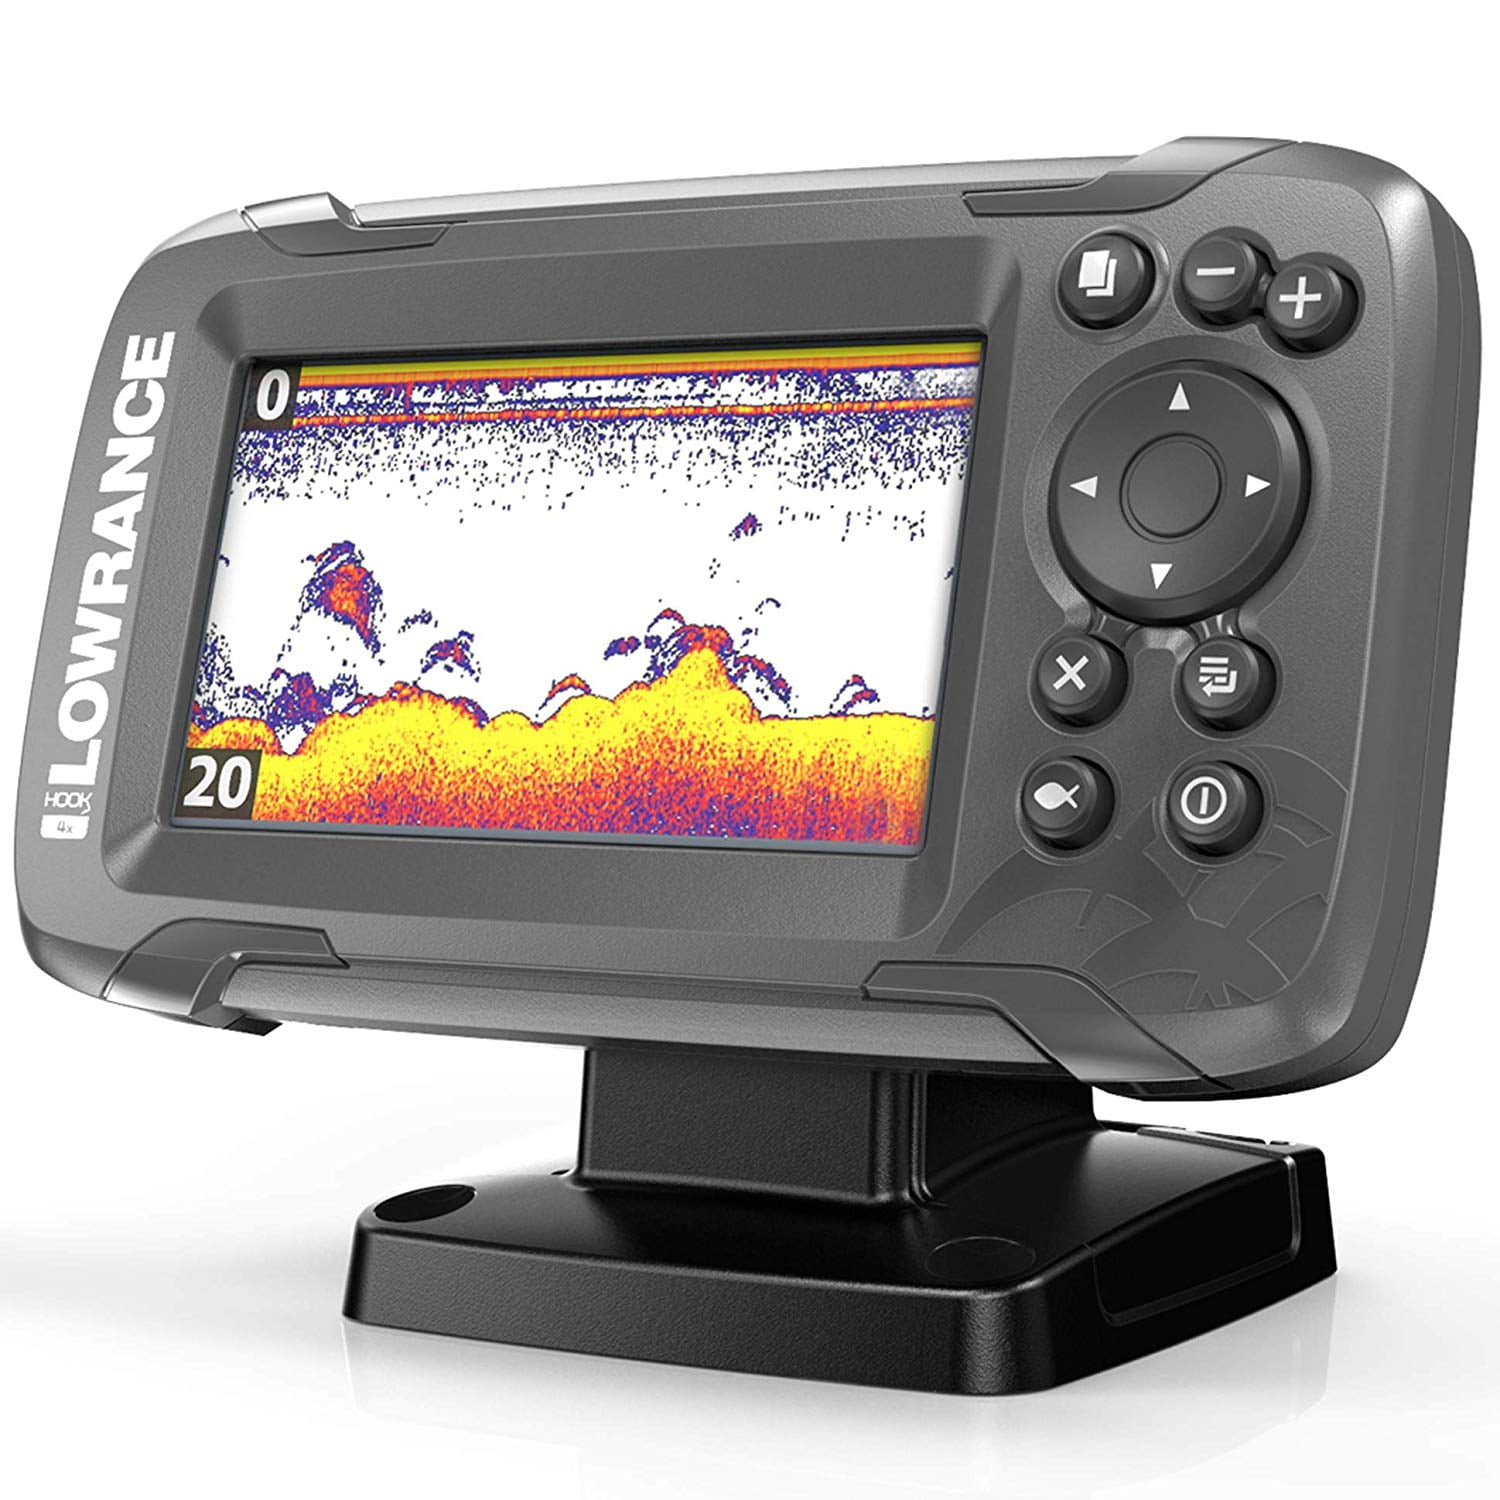 Lowrance Hook2 4x Fish Finder With Bullet Skimmer Transducer Auto Tuning Sonar 